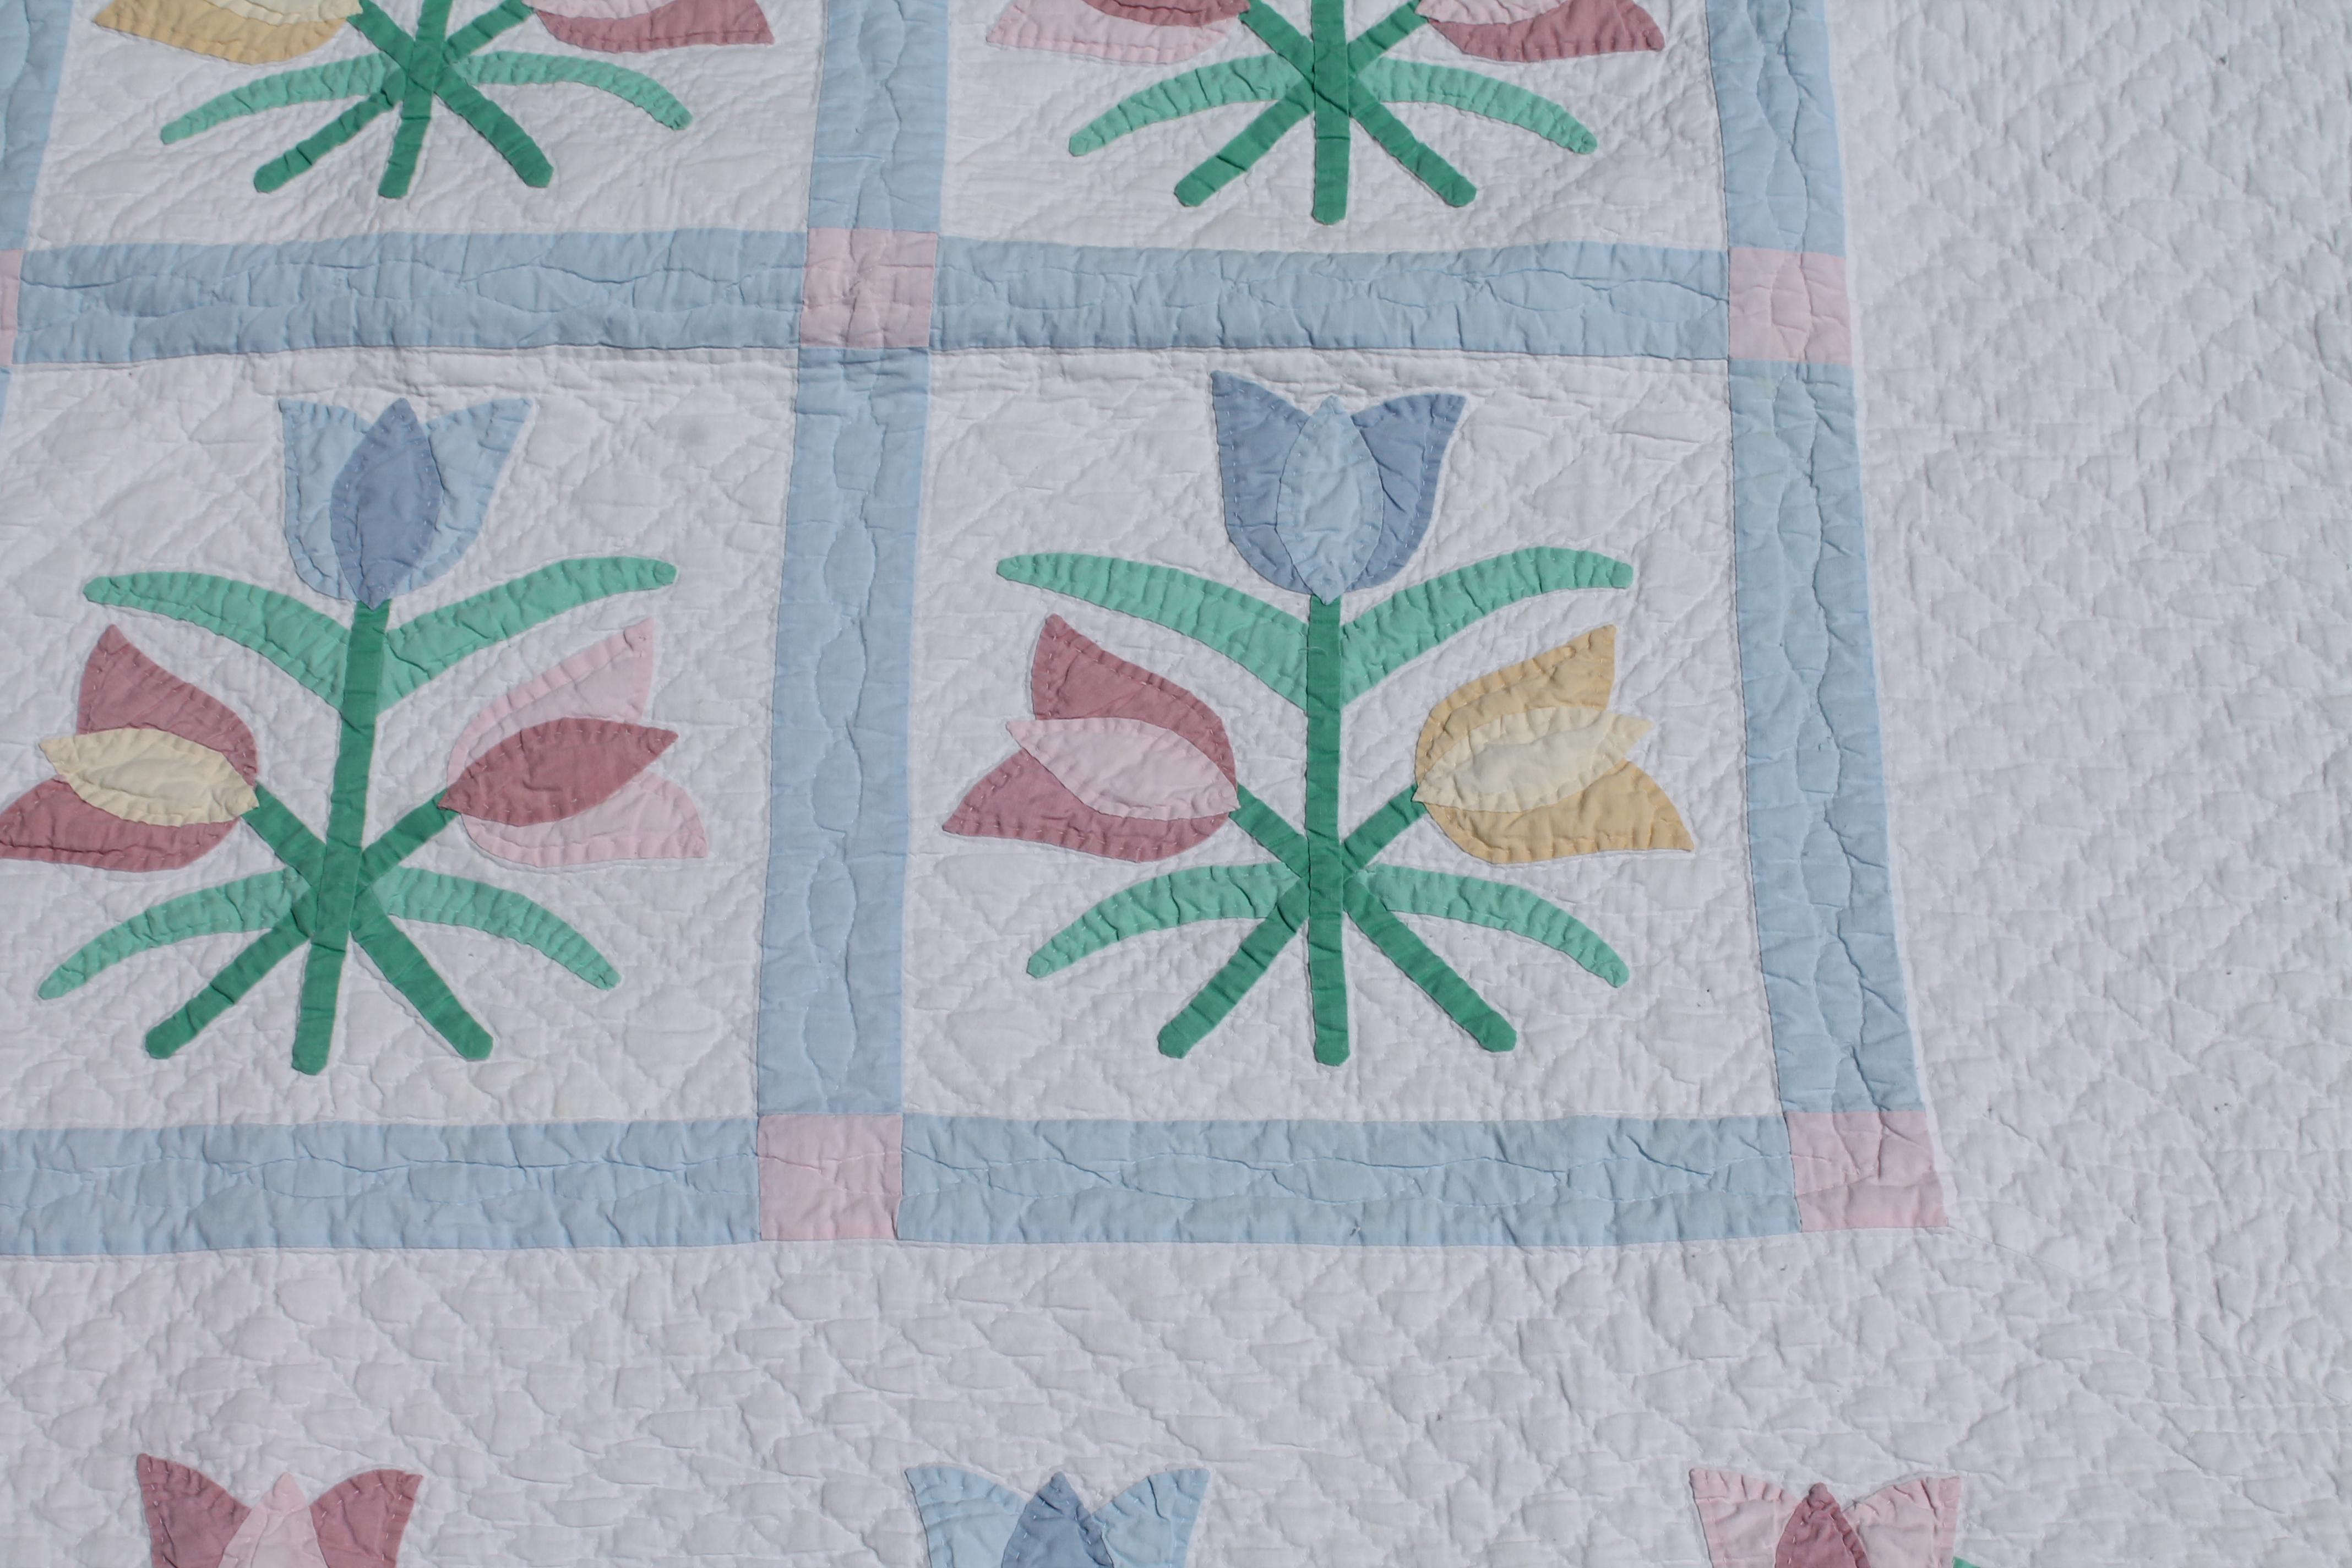 This fine detailed applique is late but great with fine piece work and quilting.